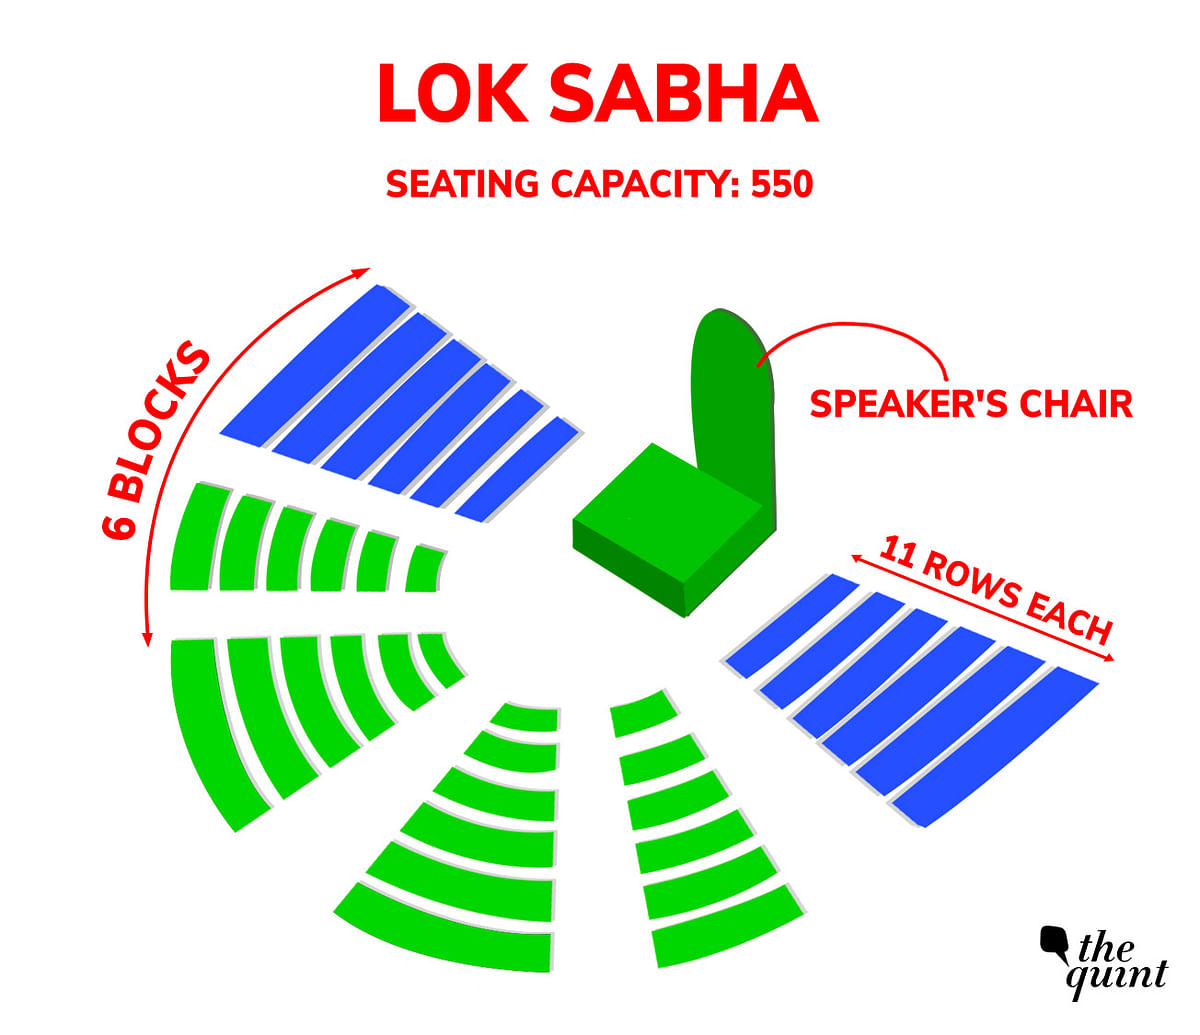 In the 545-member house, how are the 20 front-row seats allocated?